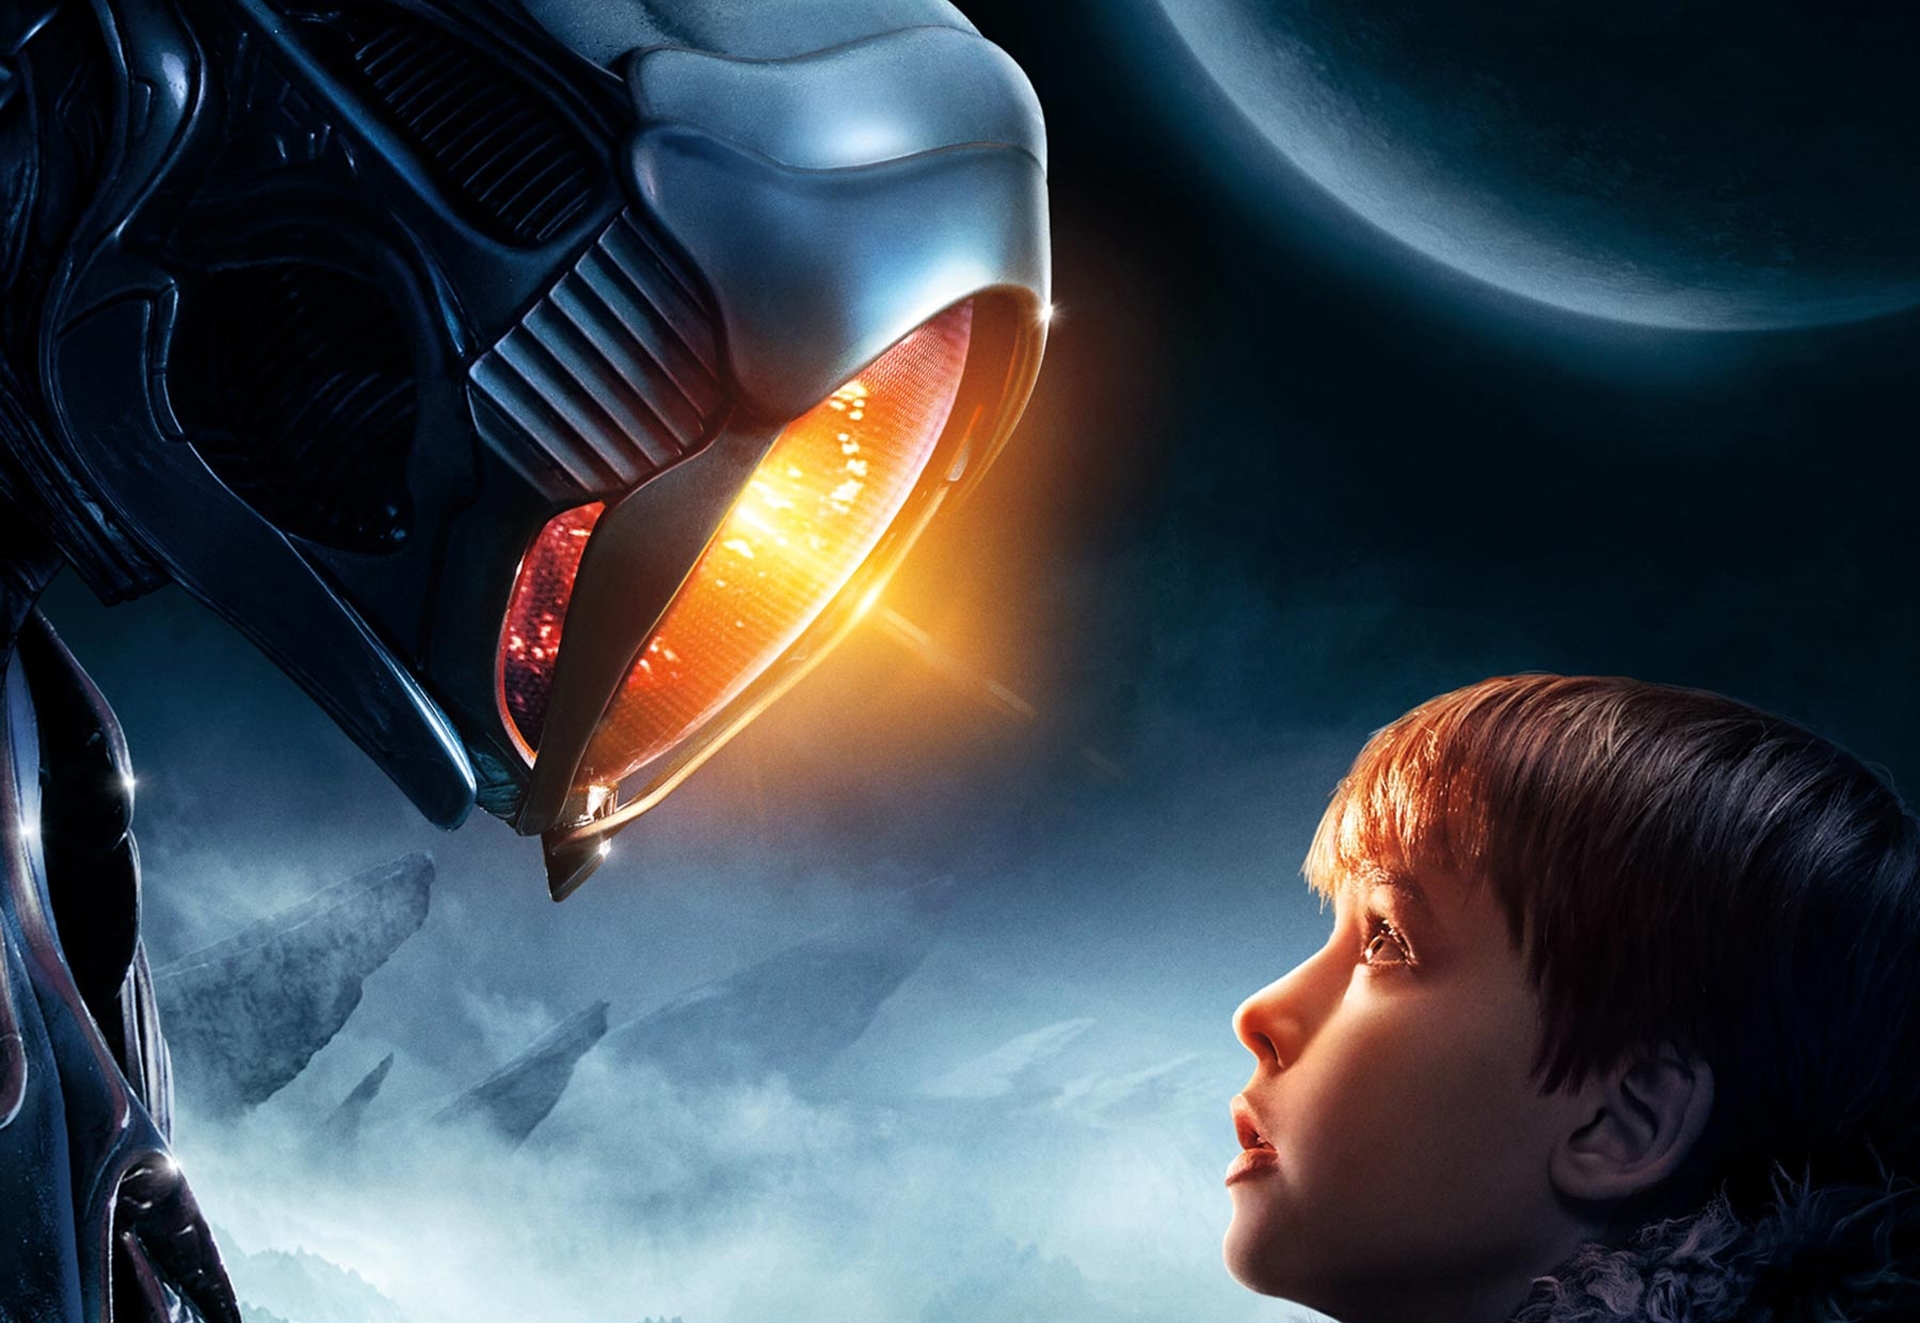 lost in space 2018 netflix, hd tv shows, 4k wallpapers, images